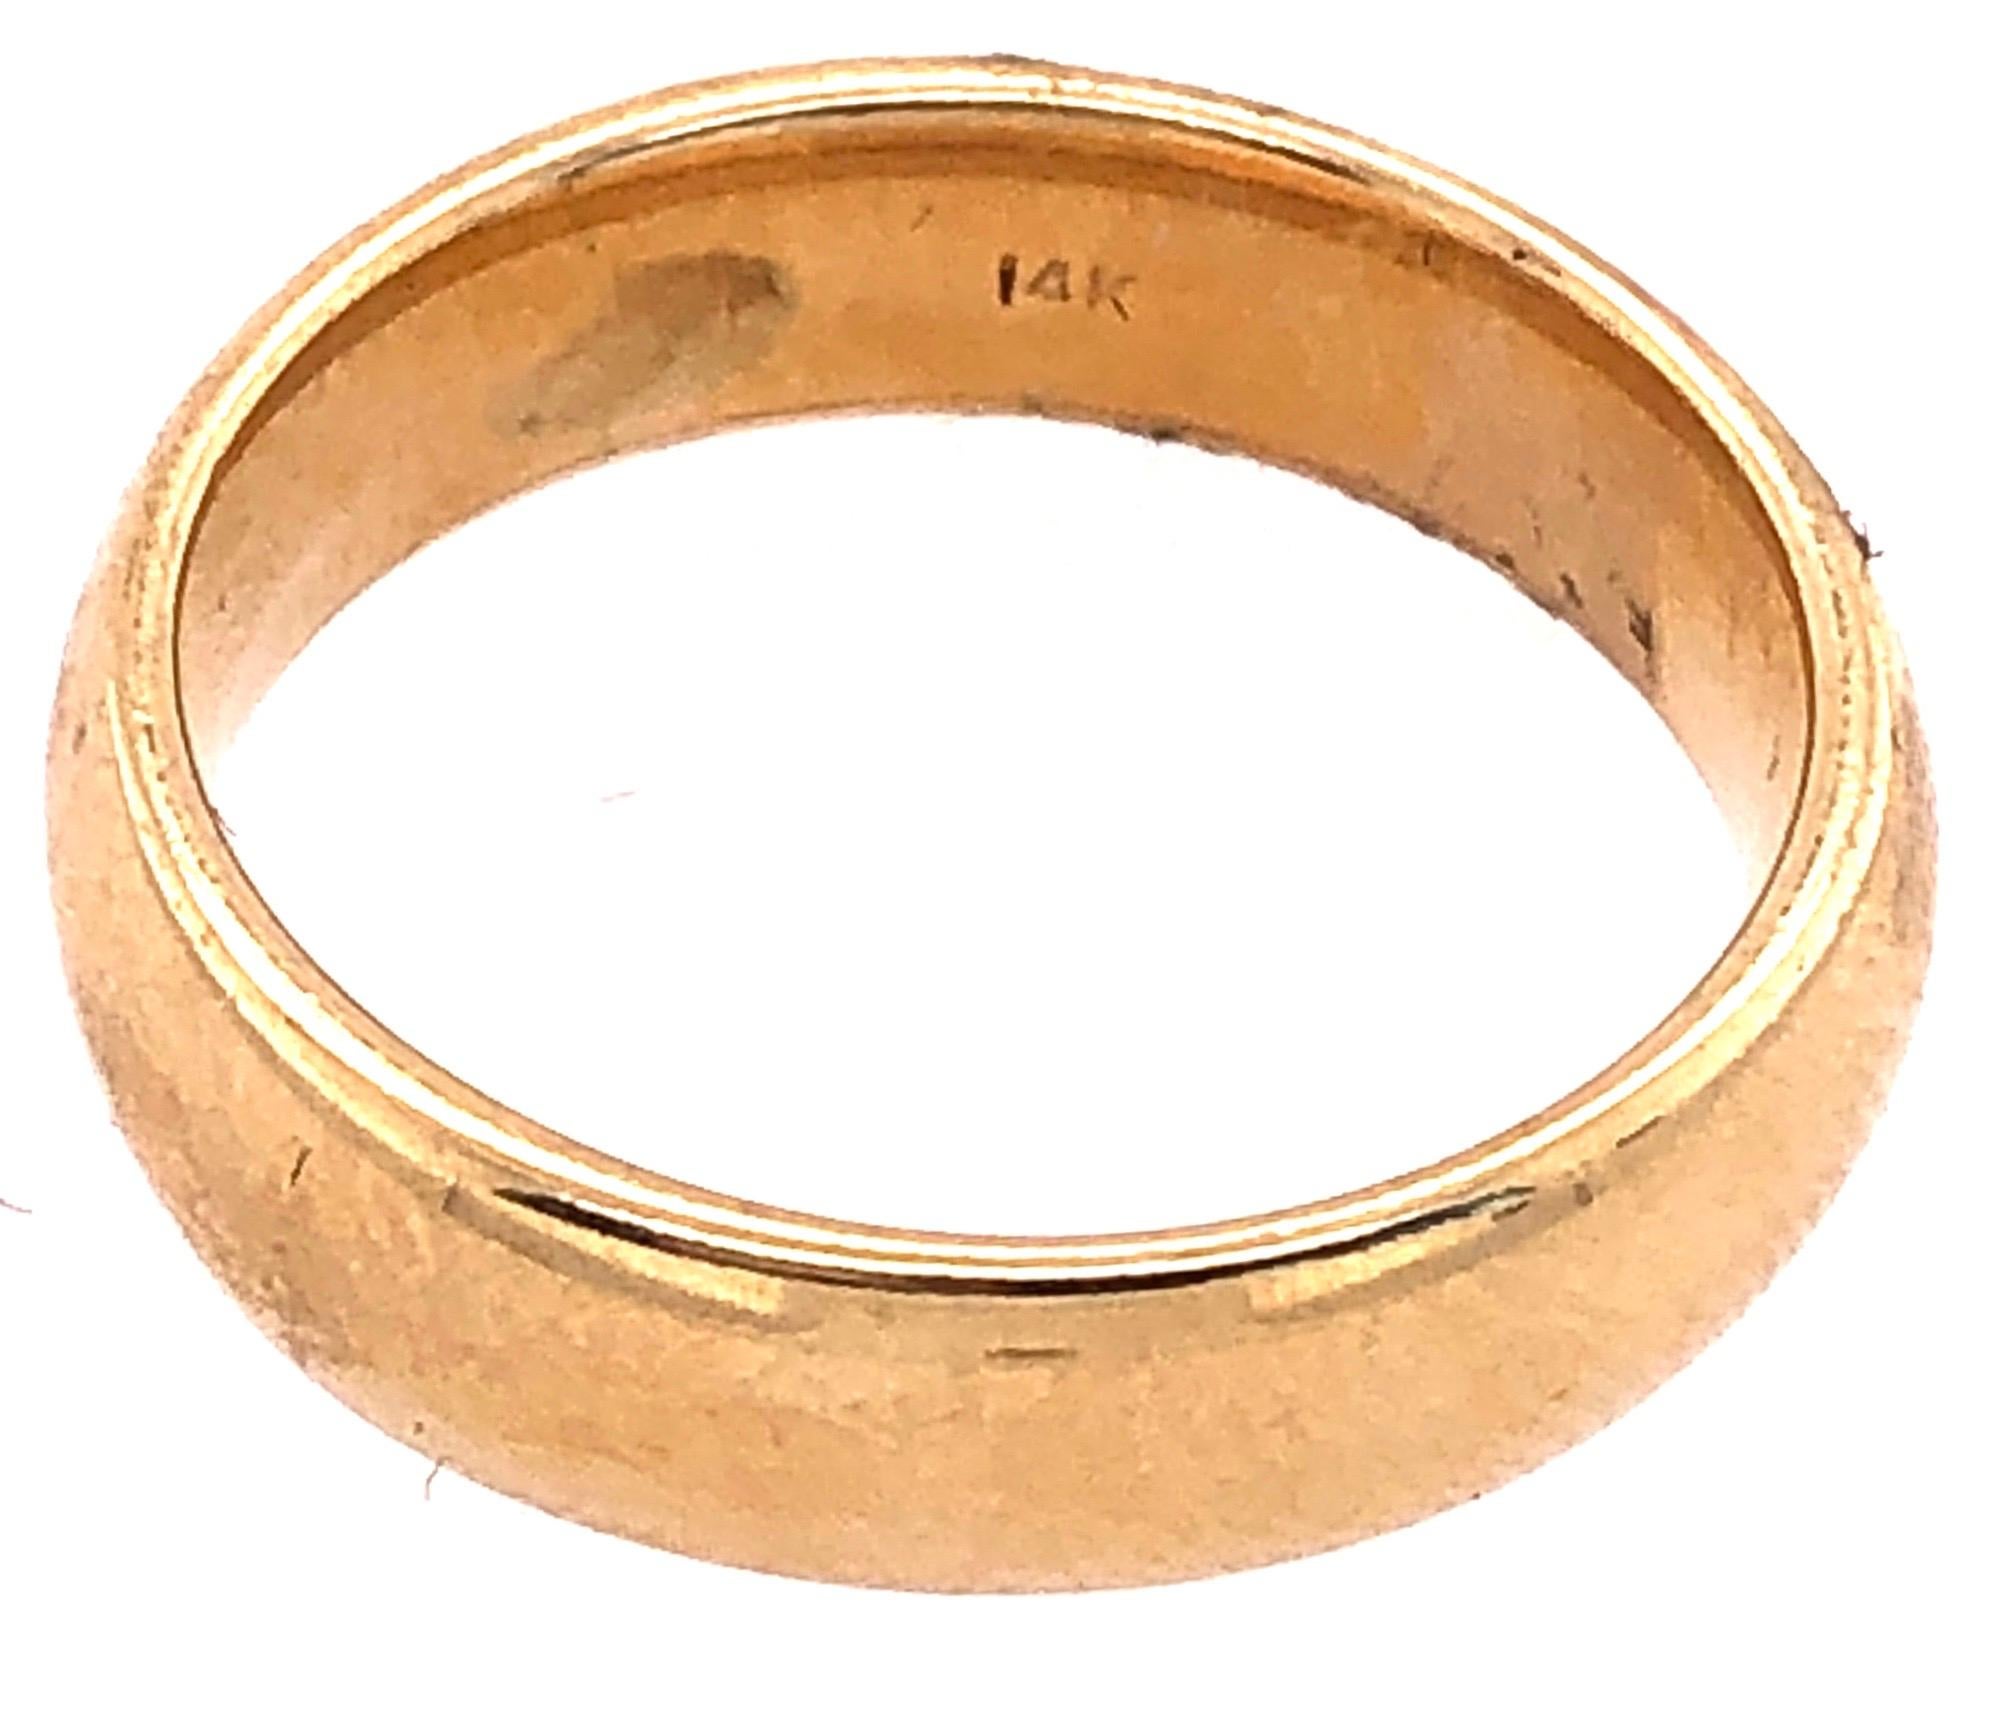 14 Karat Yellow Gold Wedding / Band Ring In Good Condition For Sale In Stamford, CT